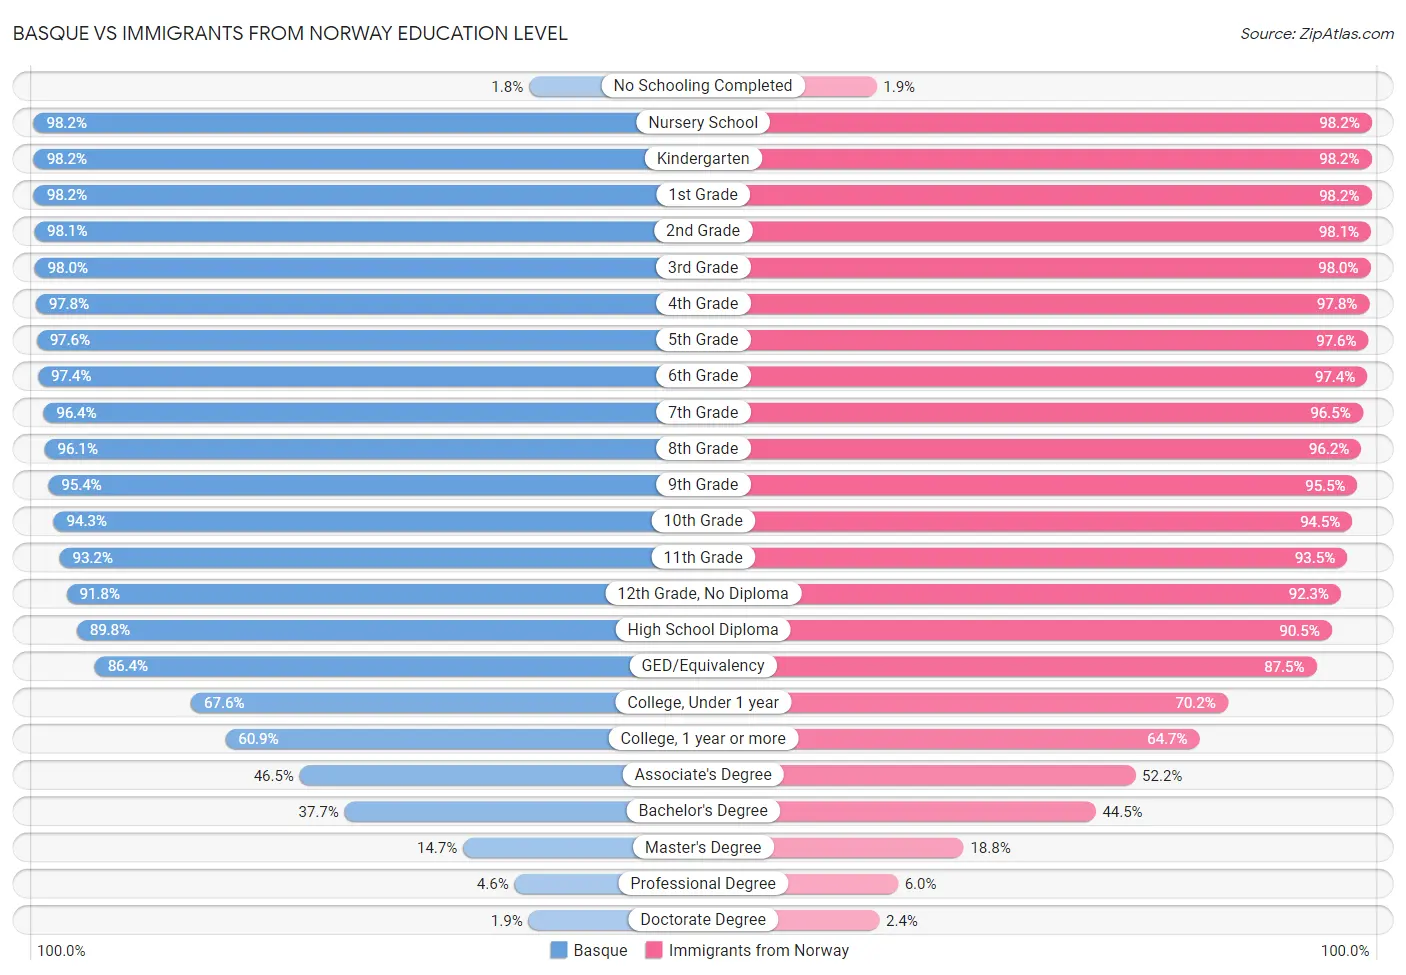 Basque vs Immigrants from Norway Education Level